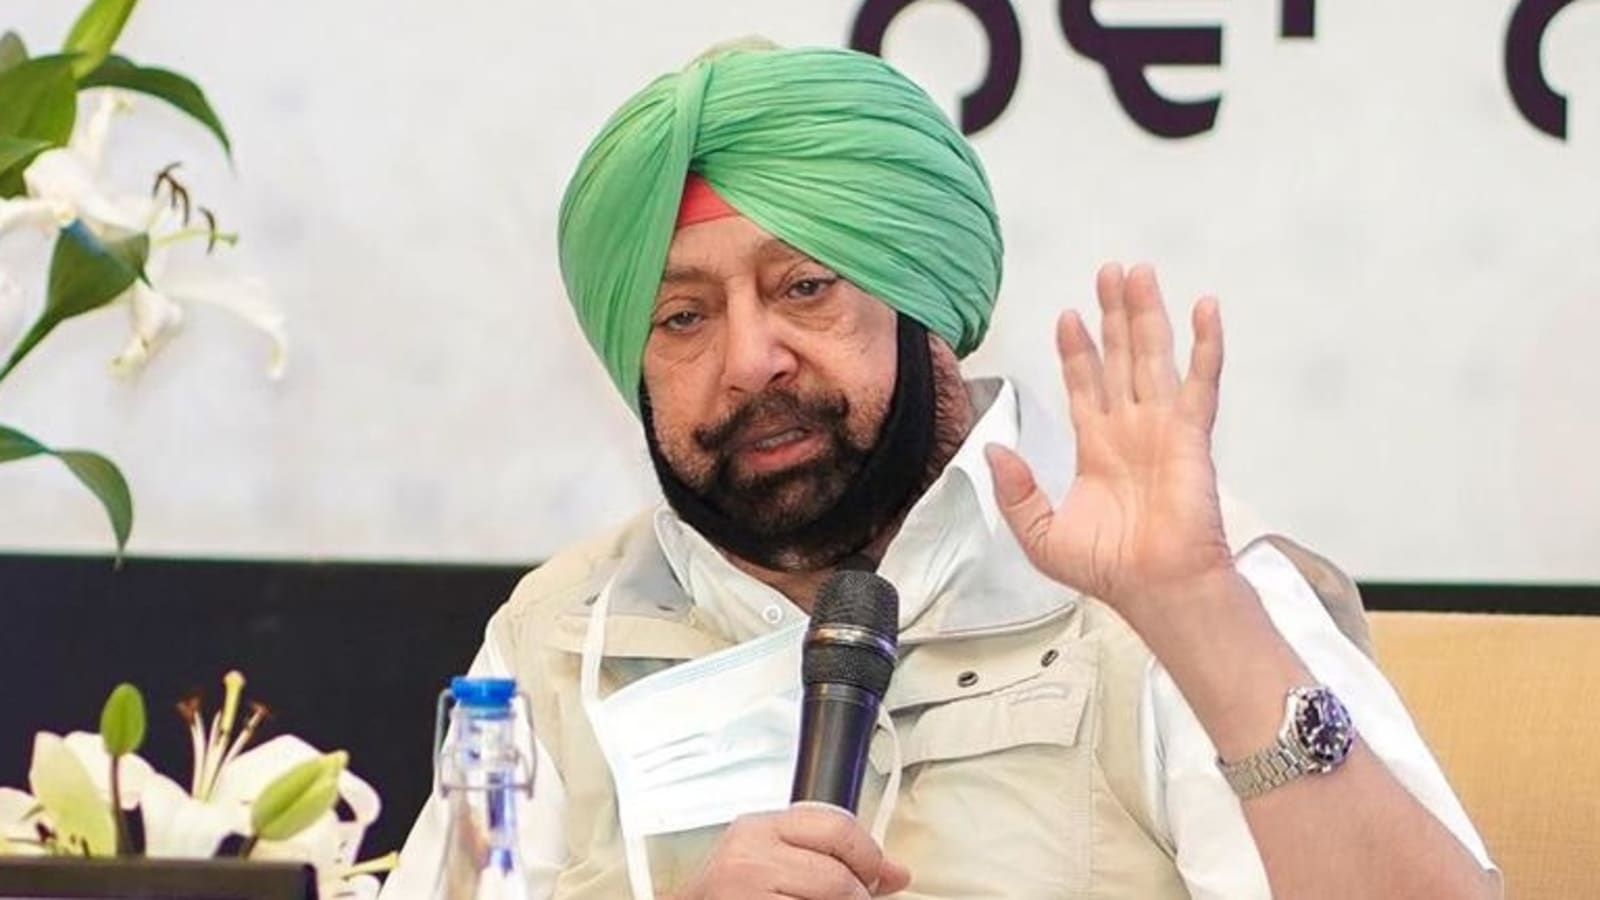 Irresponsible, ridiculous: Amarinder Singh on Congress attack over BSF row | Latest News India - Hindustan Times